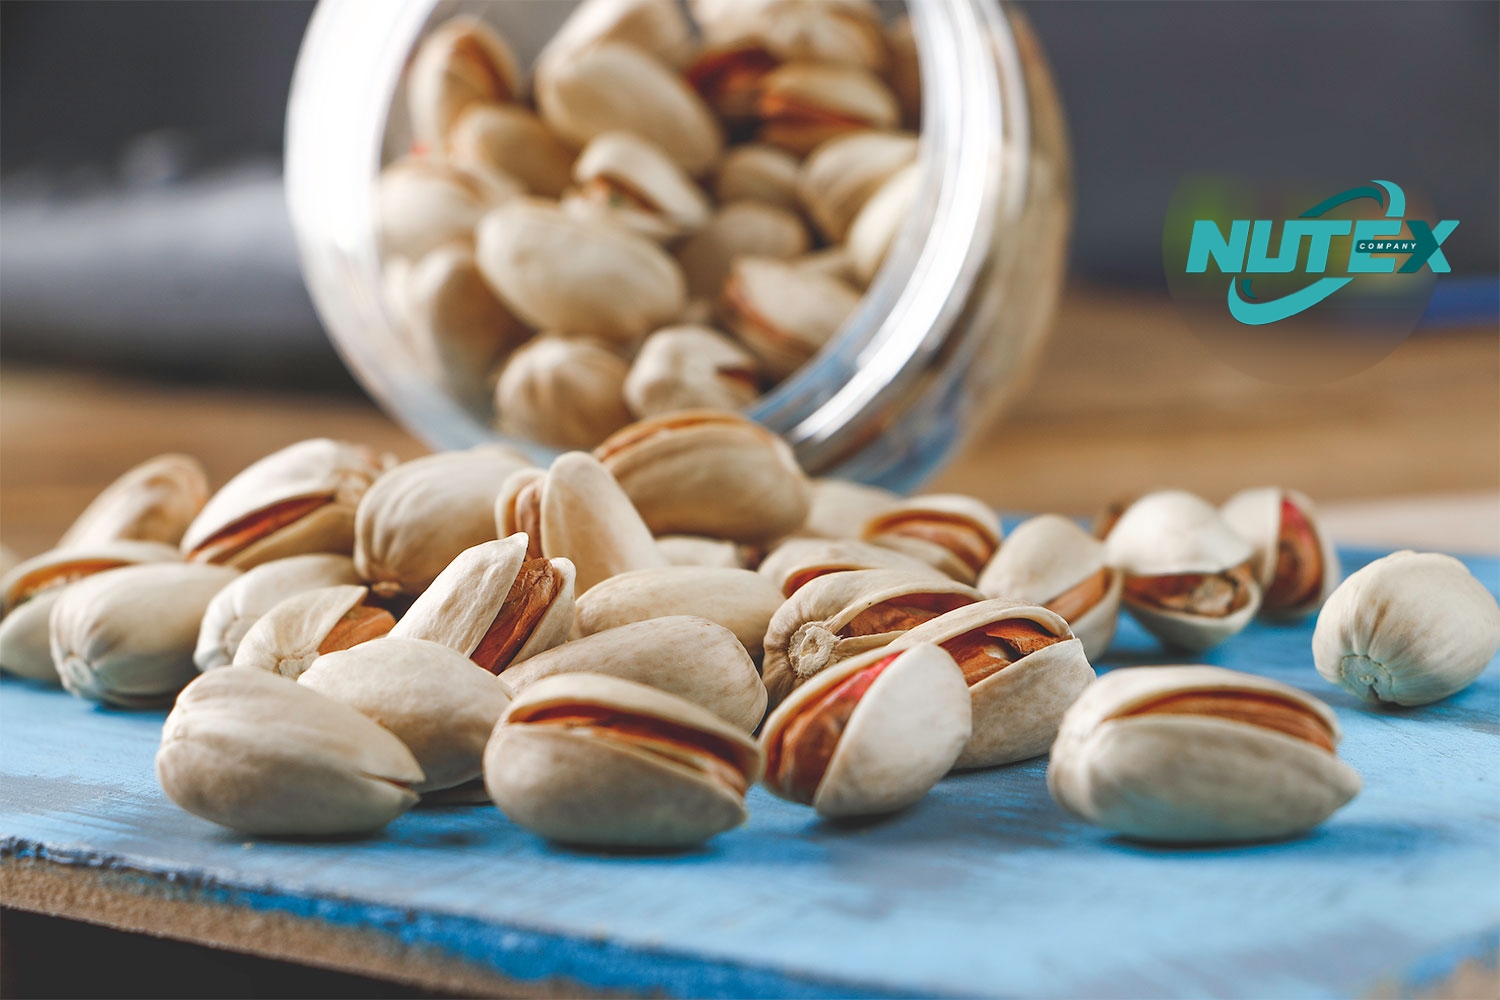  The Largest Supplier of Akbari Pistachios in Iran